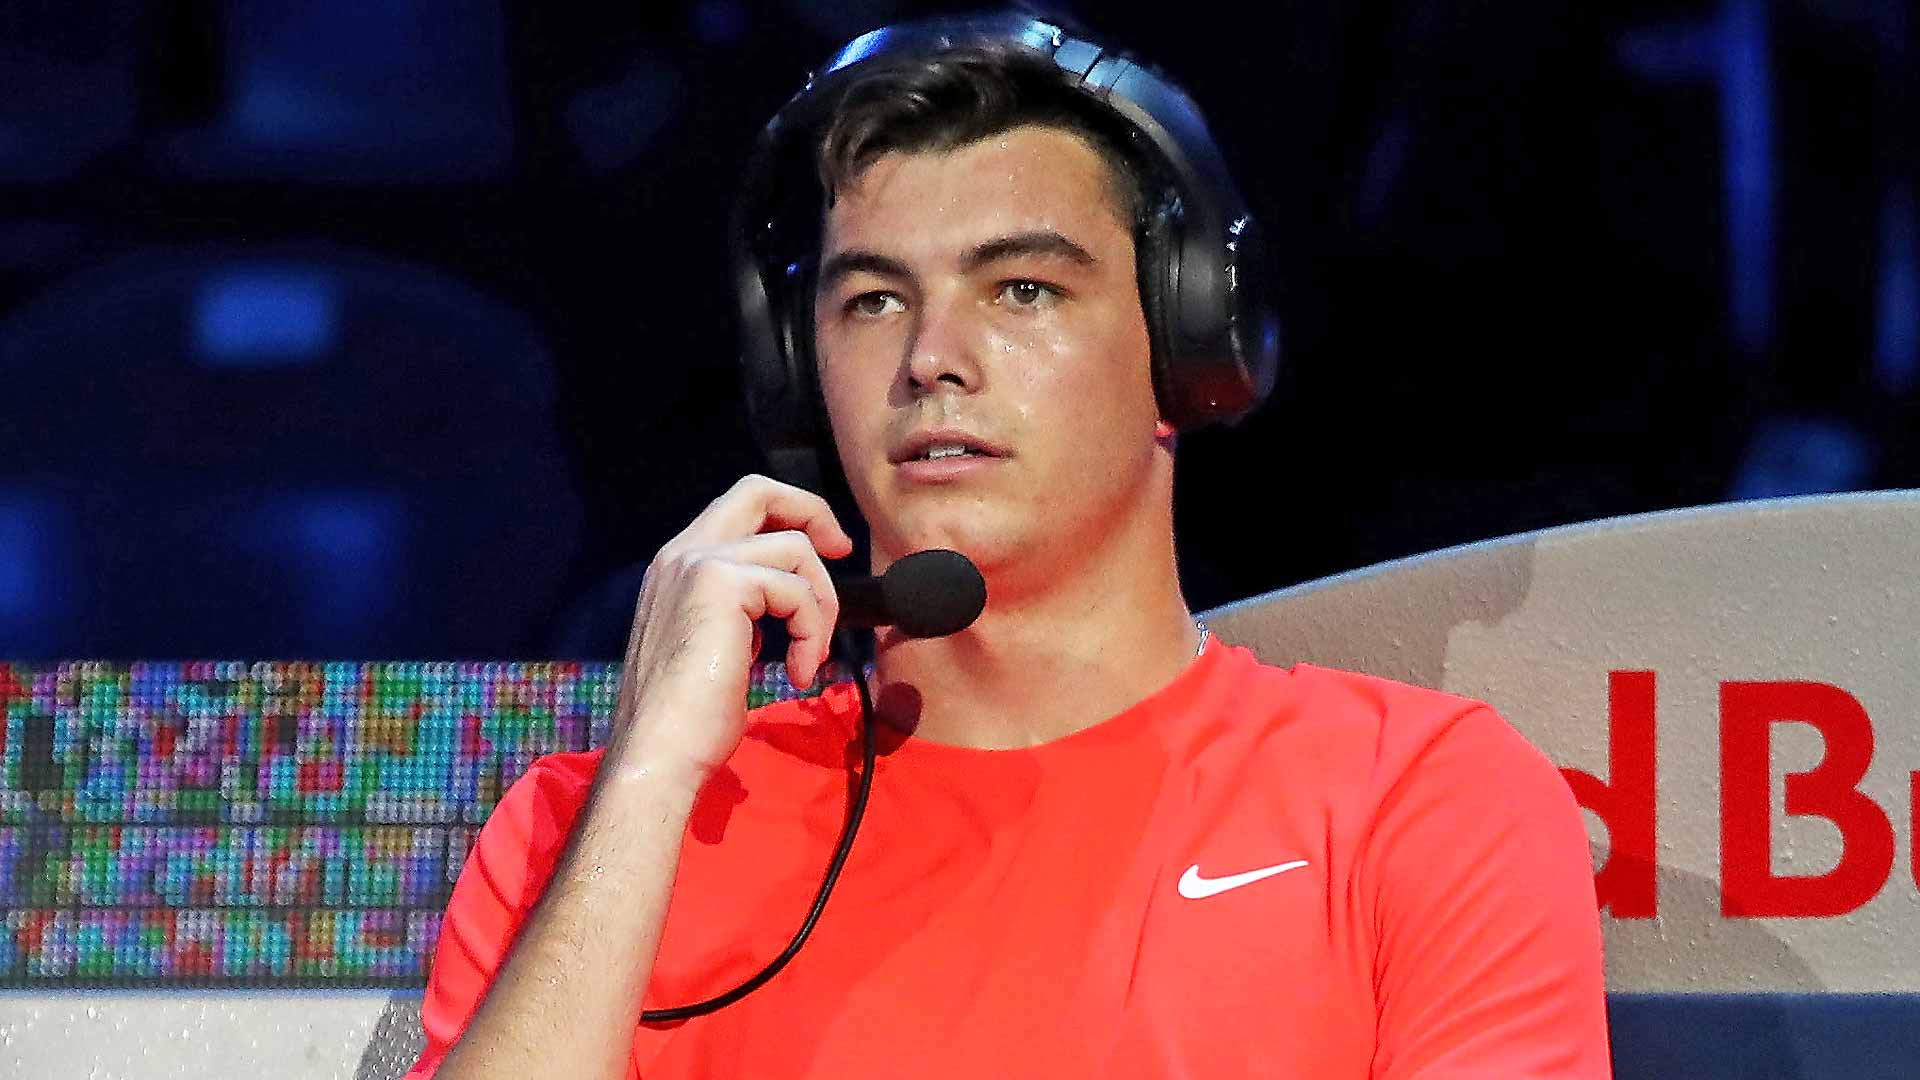 Taylor Fritz, who competed at the 2018 Next Gen ATP Finals, begins 2019 at No. 49 in the ATP Rankings.